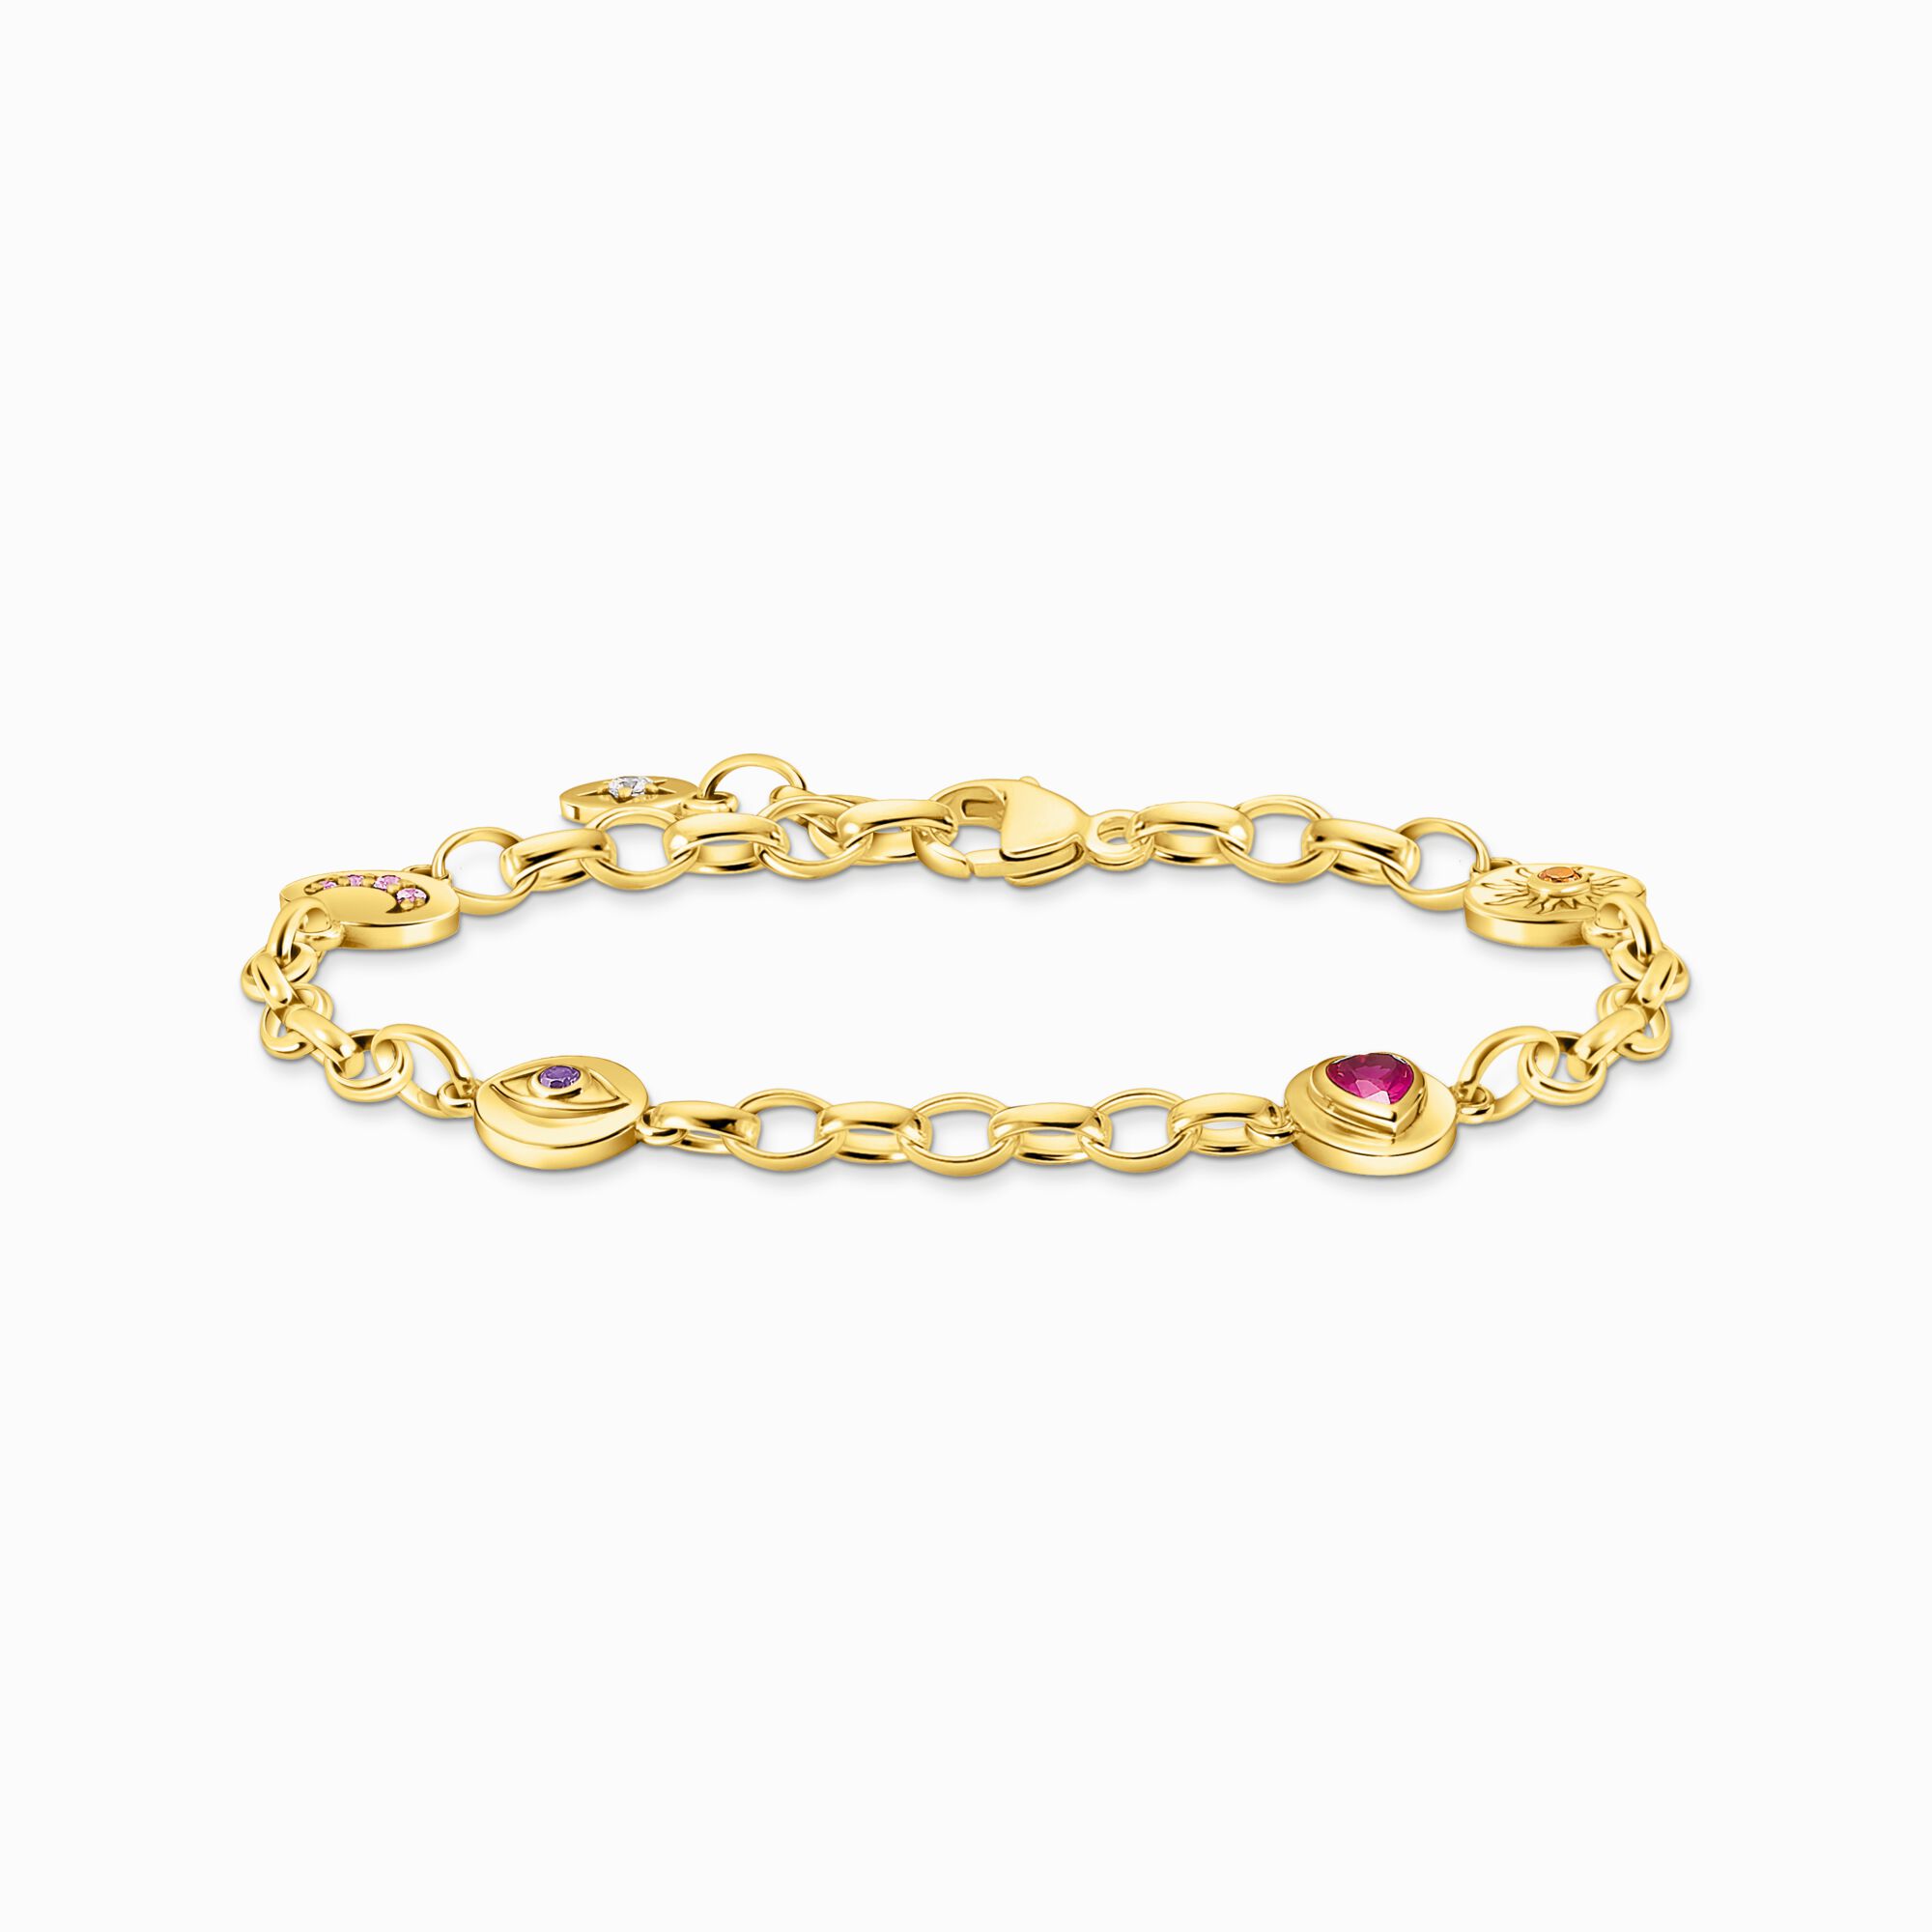 THOMAS SABO Yellow-gold plated bracelet with round elements and stones A2138-995-7